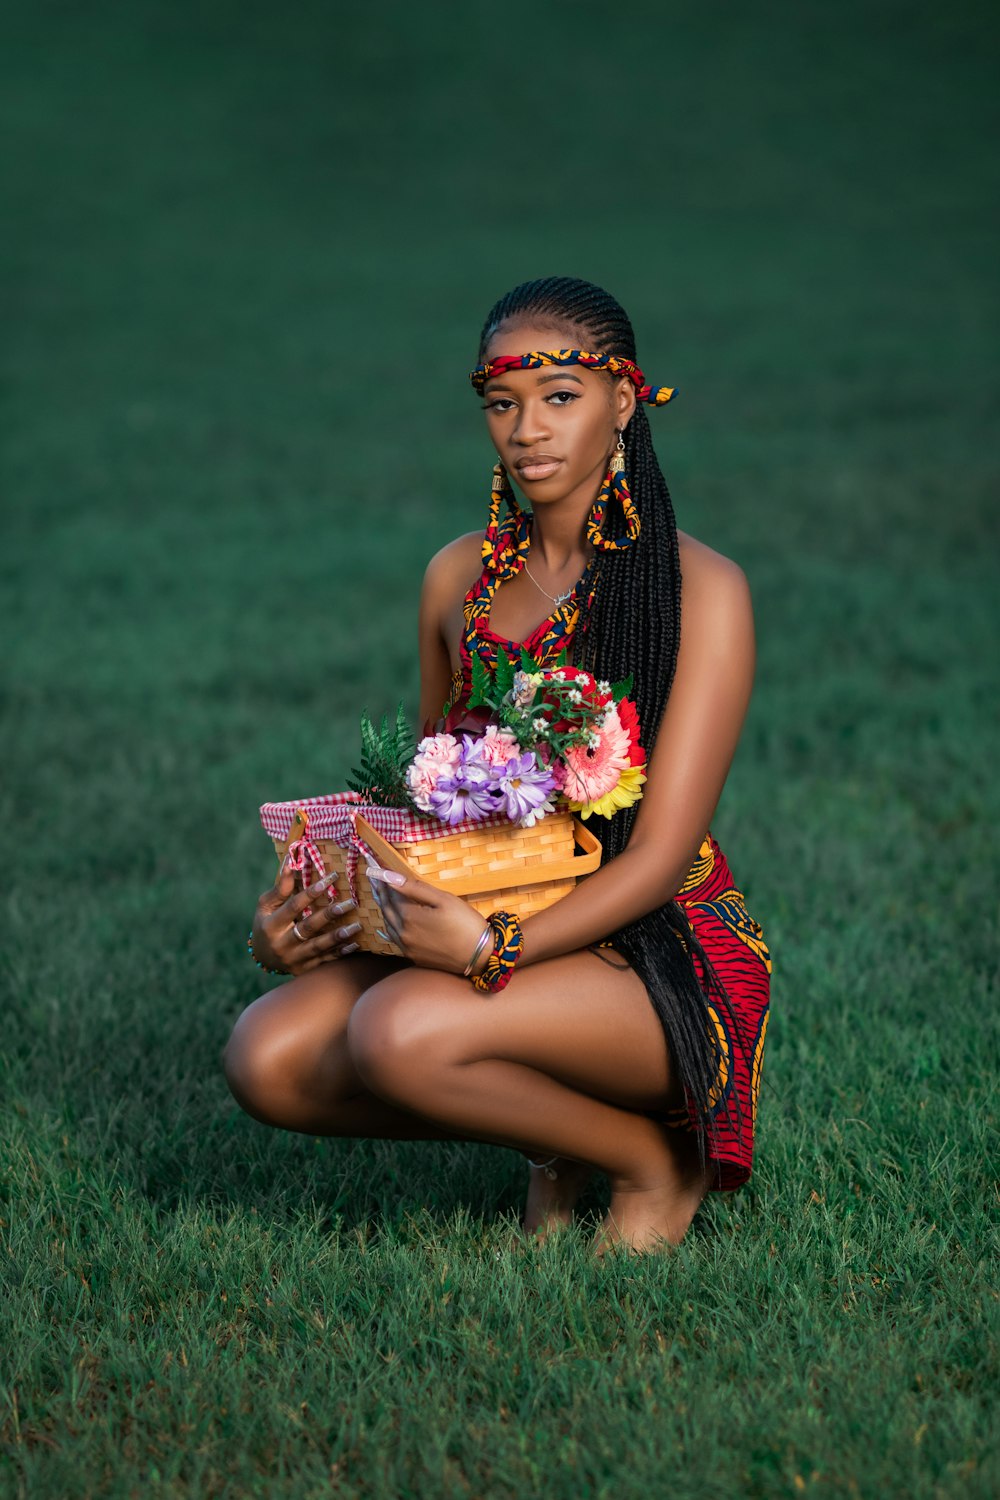 a woman sitting in the grass holding a basket of flowers